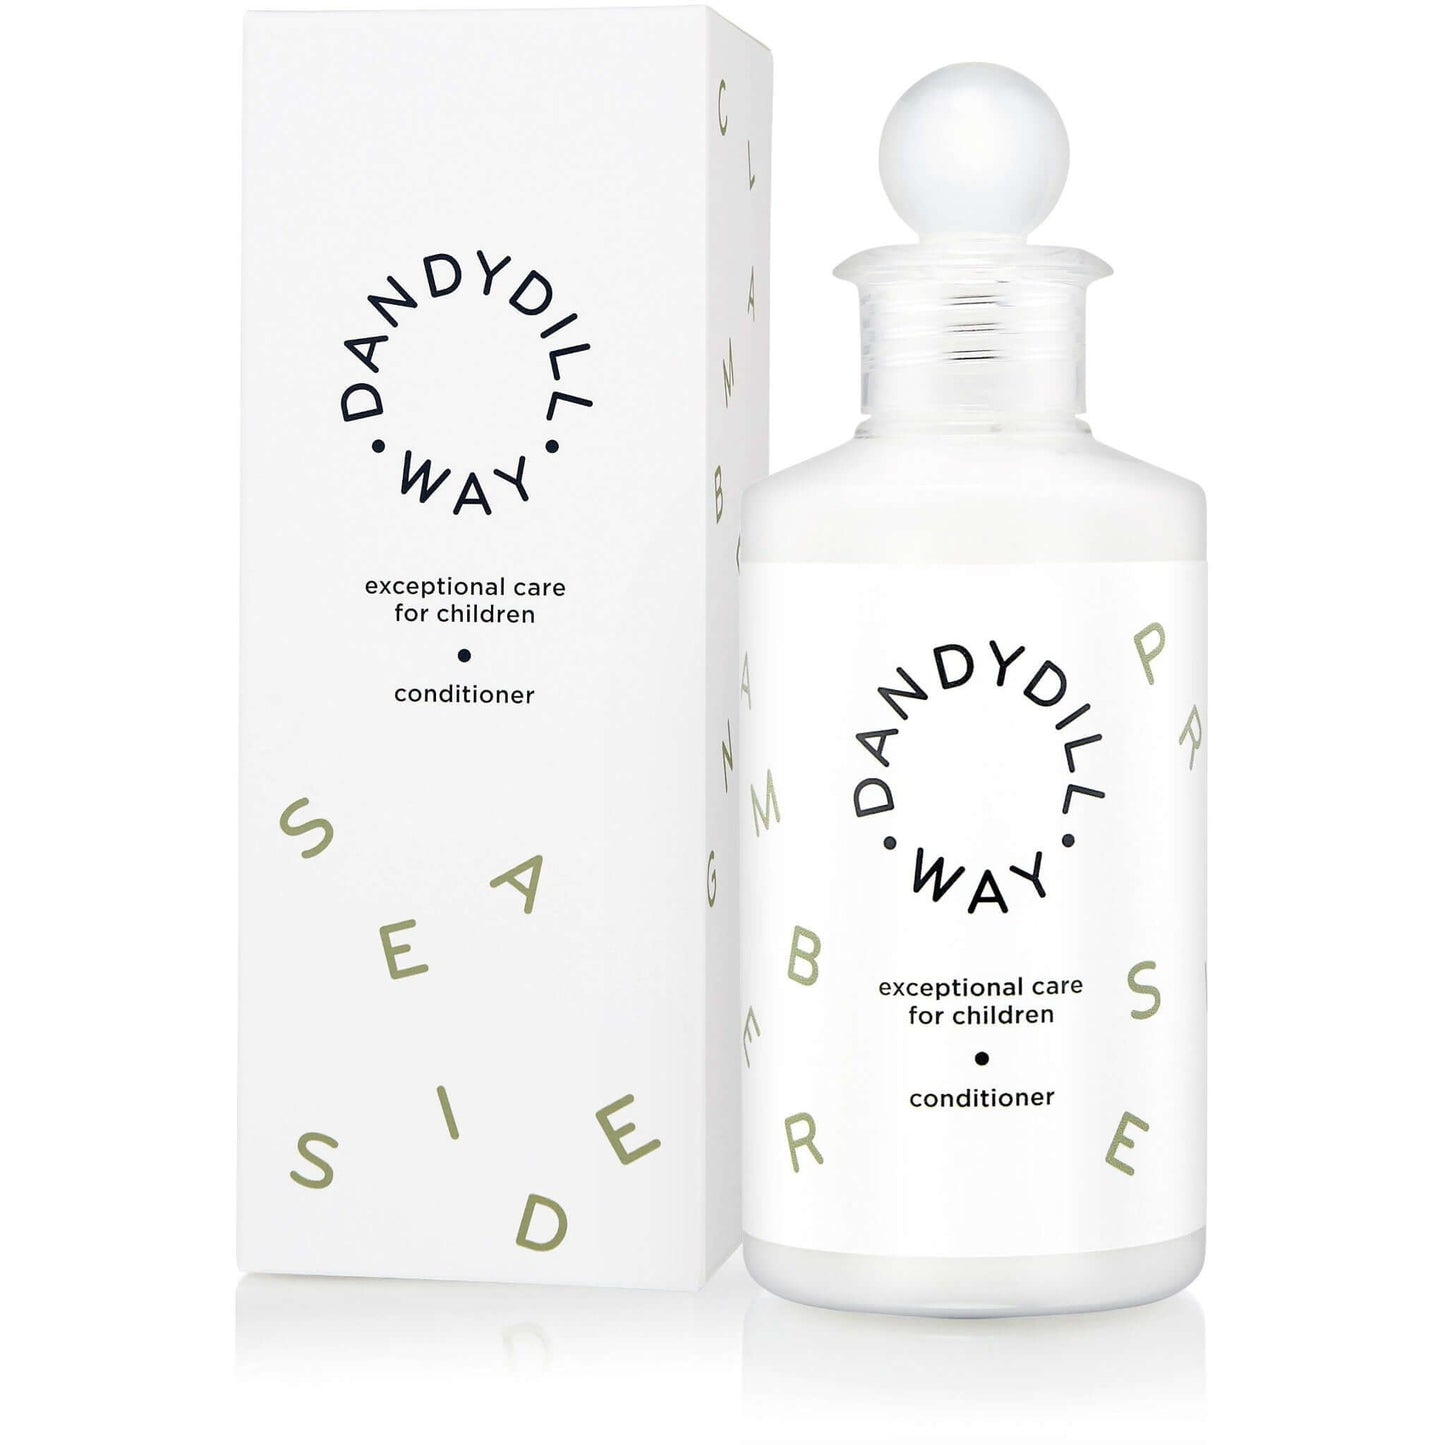 Wild Hawthorn Berry silicone free Hair Conditioner 200ml recyclable bottle and box with Dandydill Way design.